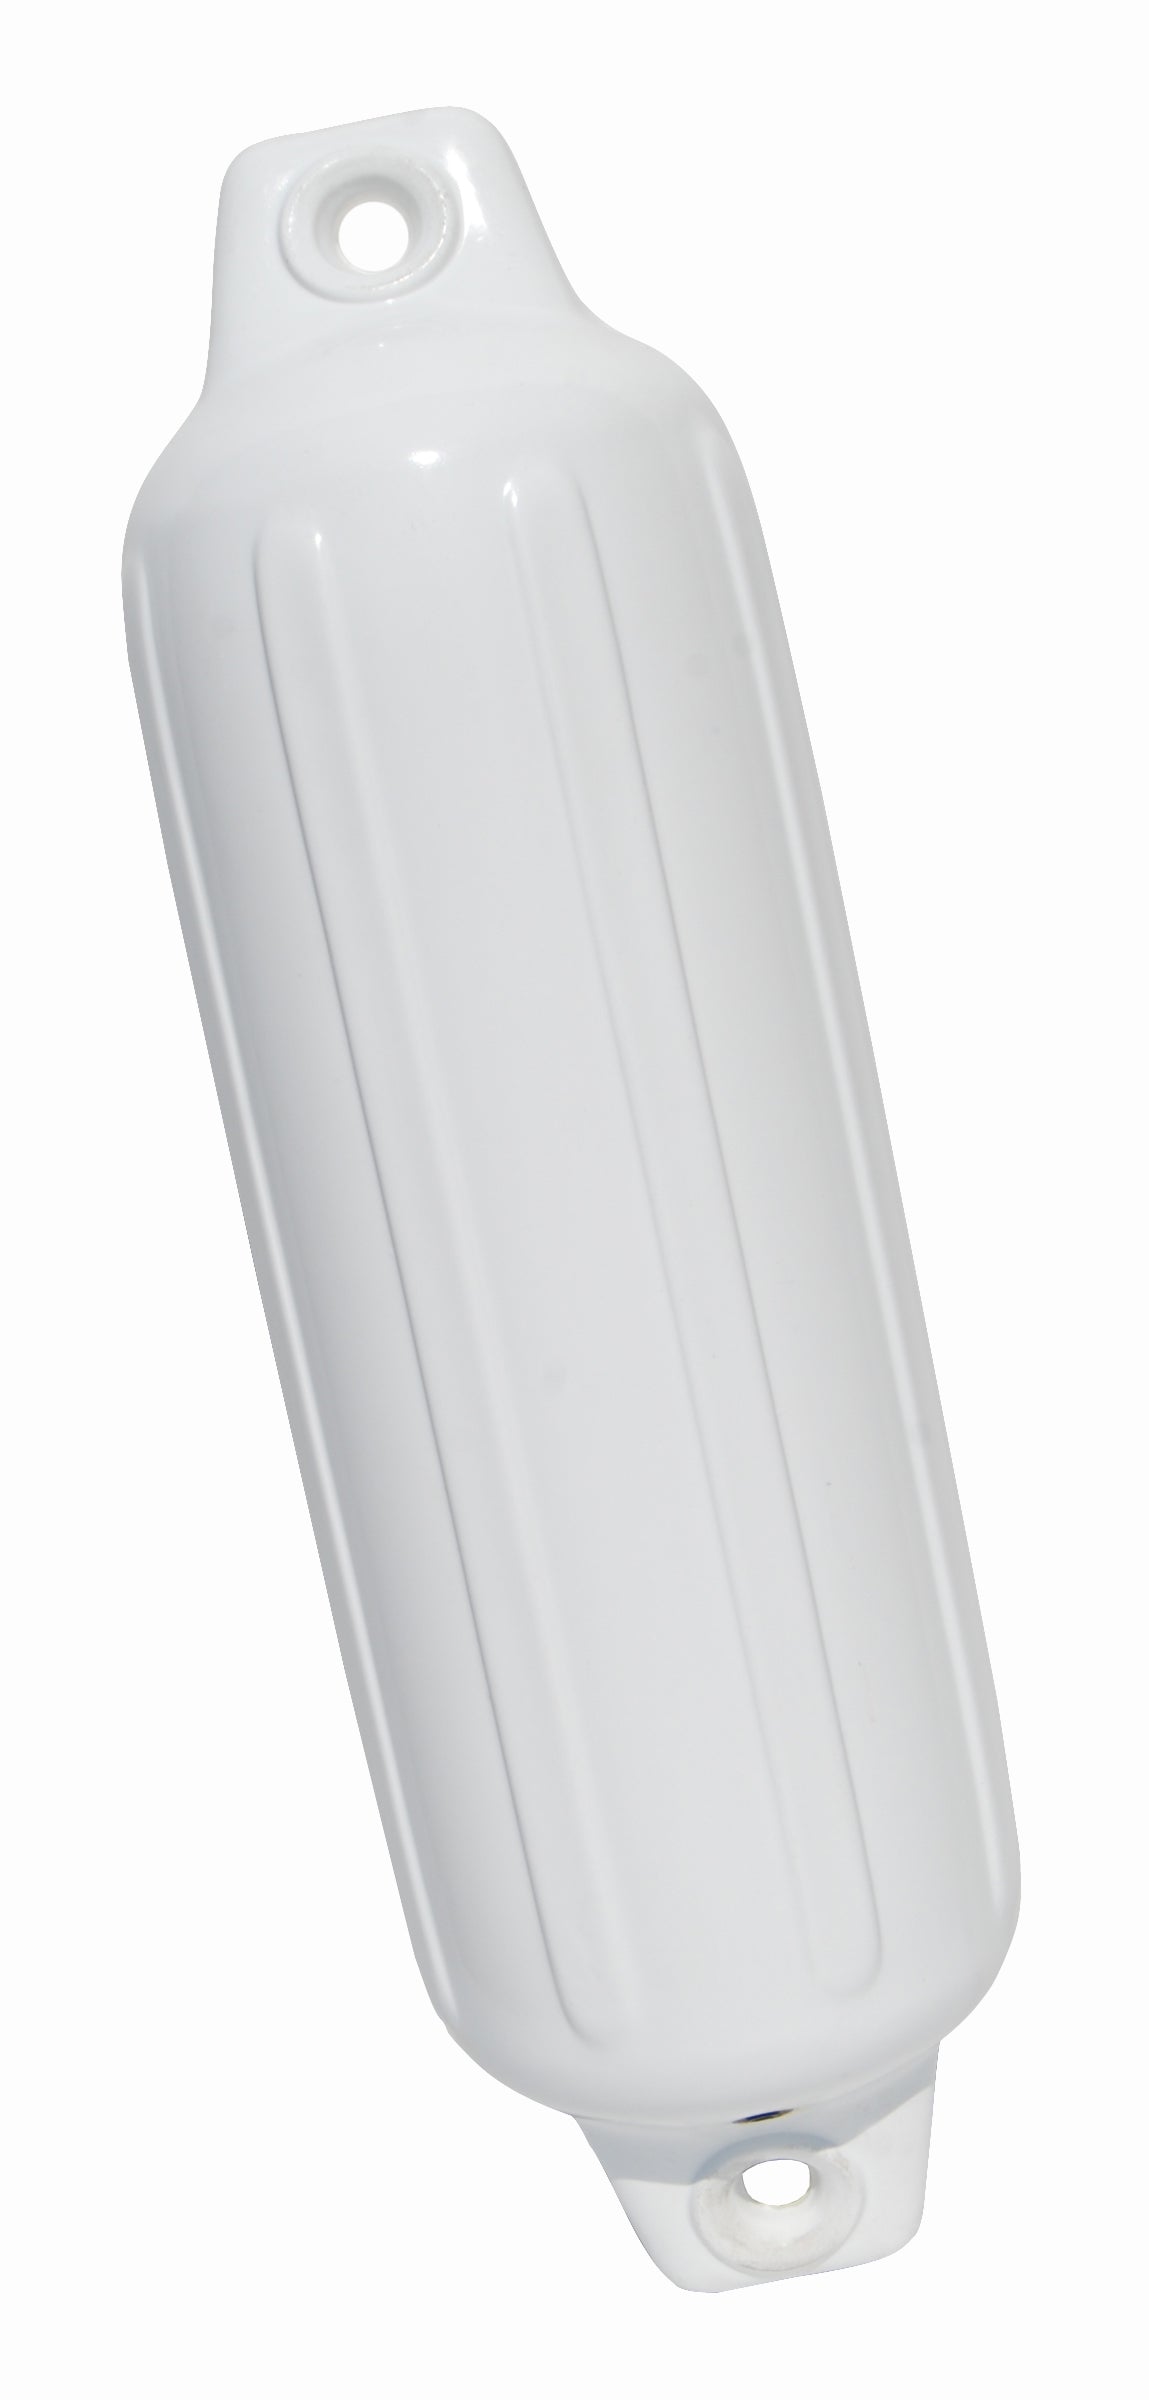 TAYLOR MADE - 31015: 5' X 18' BOAT GUARD FENDER  White